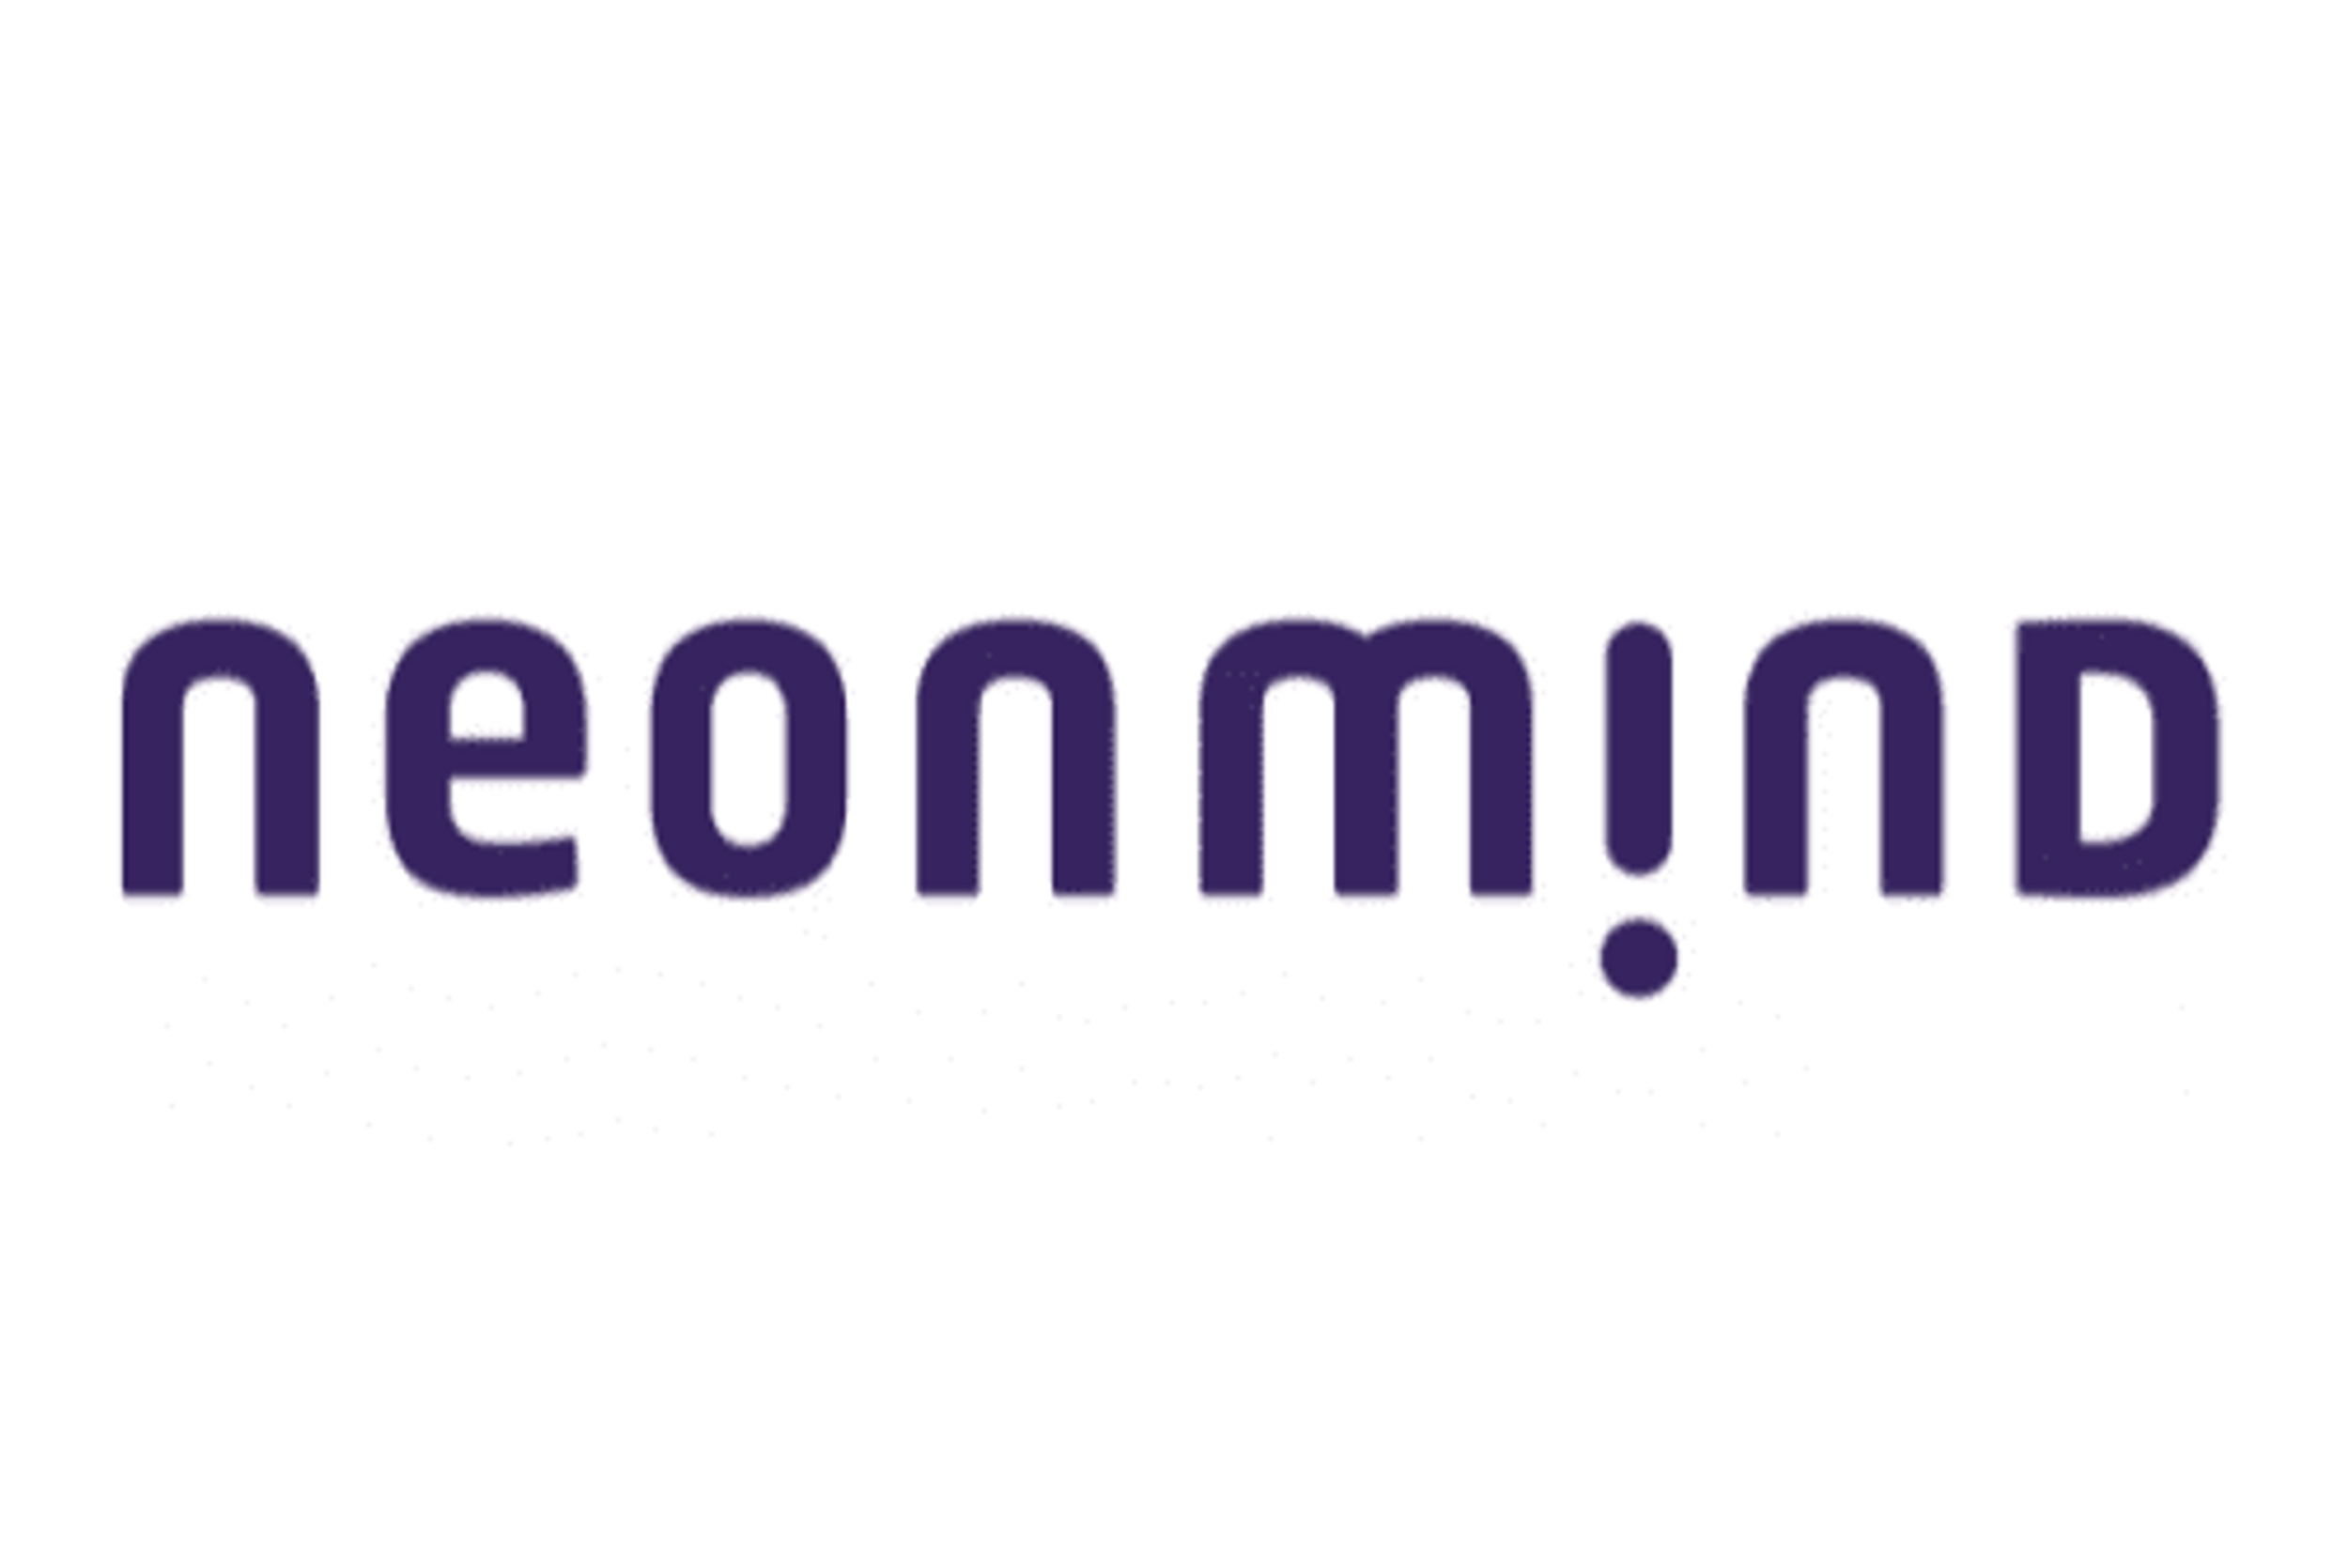 NeonMind Engages Leading Digital Platform for Medical Education and Adoption of Ketamine Treatments in Preparation of Opening its Inaugural Specialty Mental Health Clinic